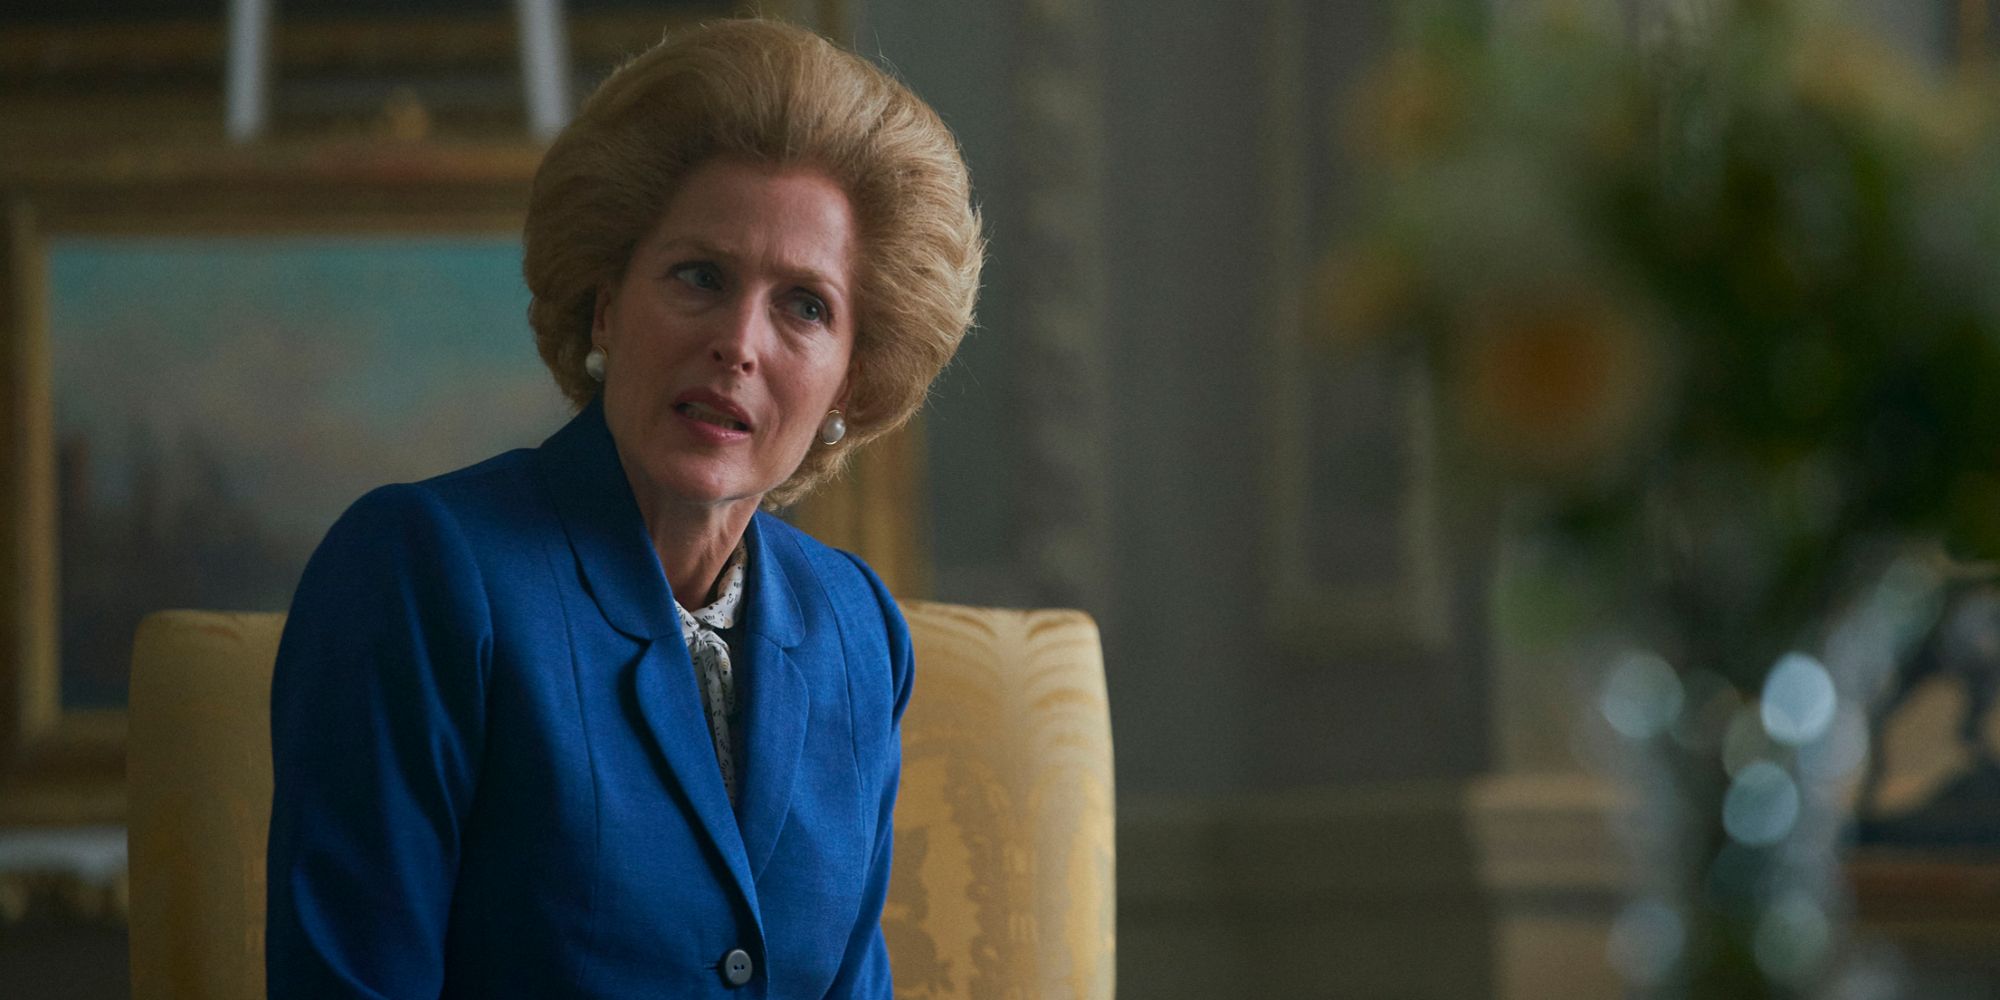 Gillian Anderson as Margaret Thatcher sitting and arguing in The Crown.